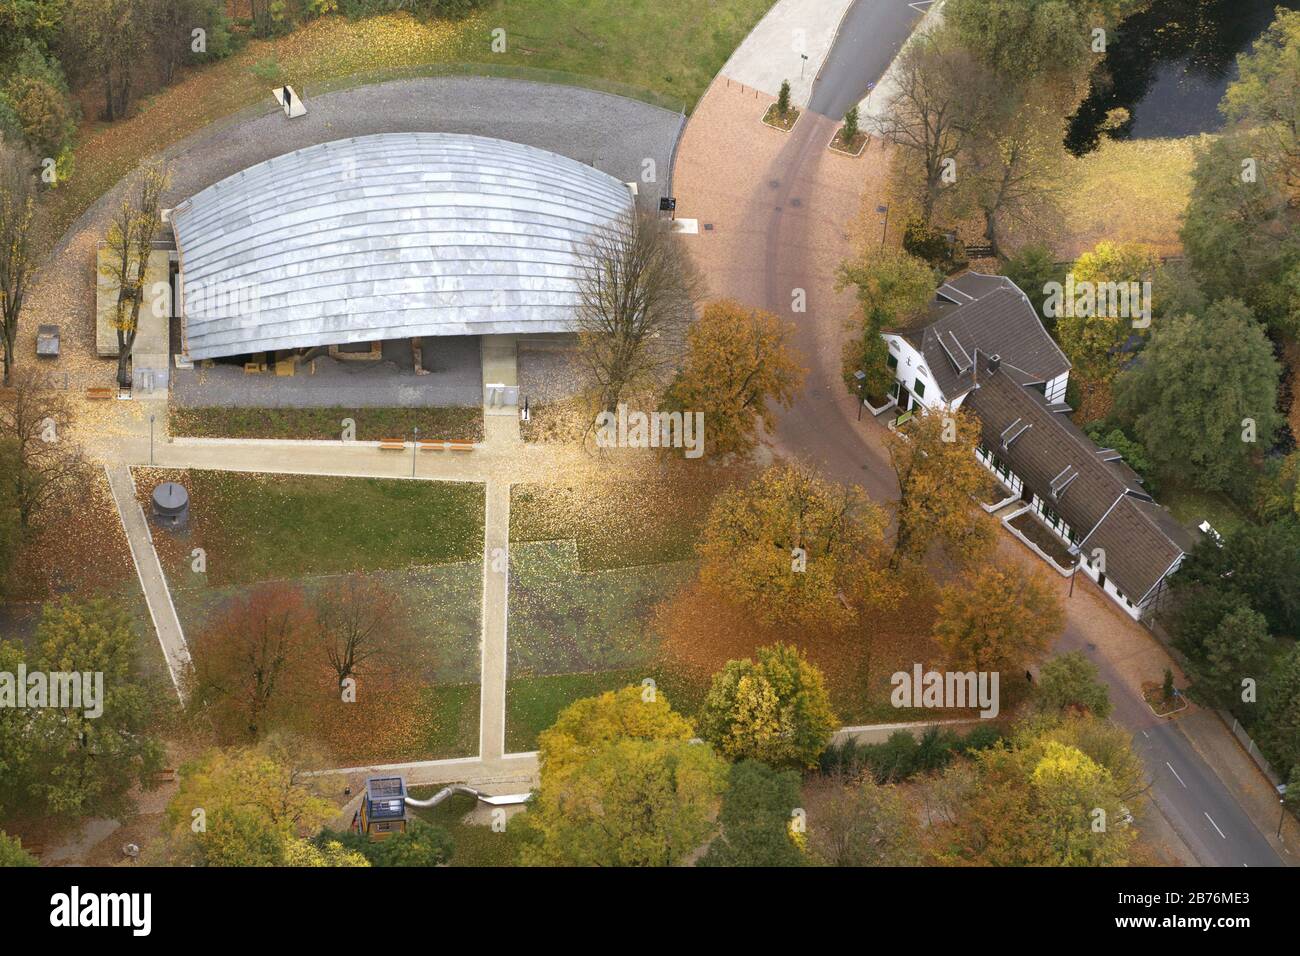 , roof over the arceological excavations at St. Antony-Huette, 26.10.2012, aerial view, Germany, North Rhine-Westphalia, Ruhr Area, Oberhausen Stock Photo